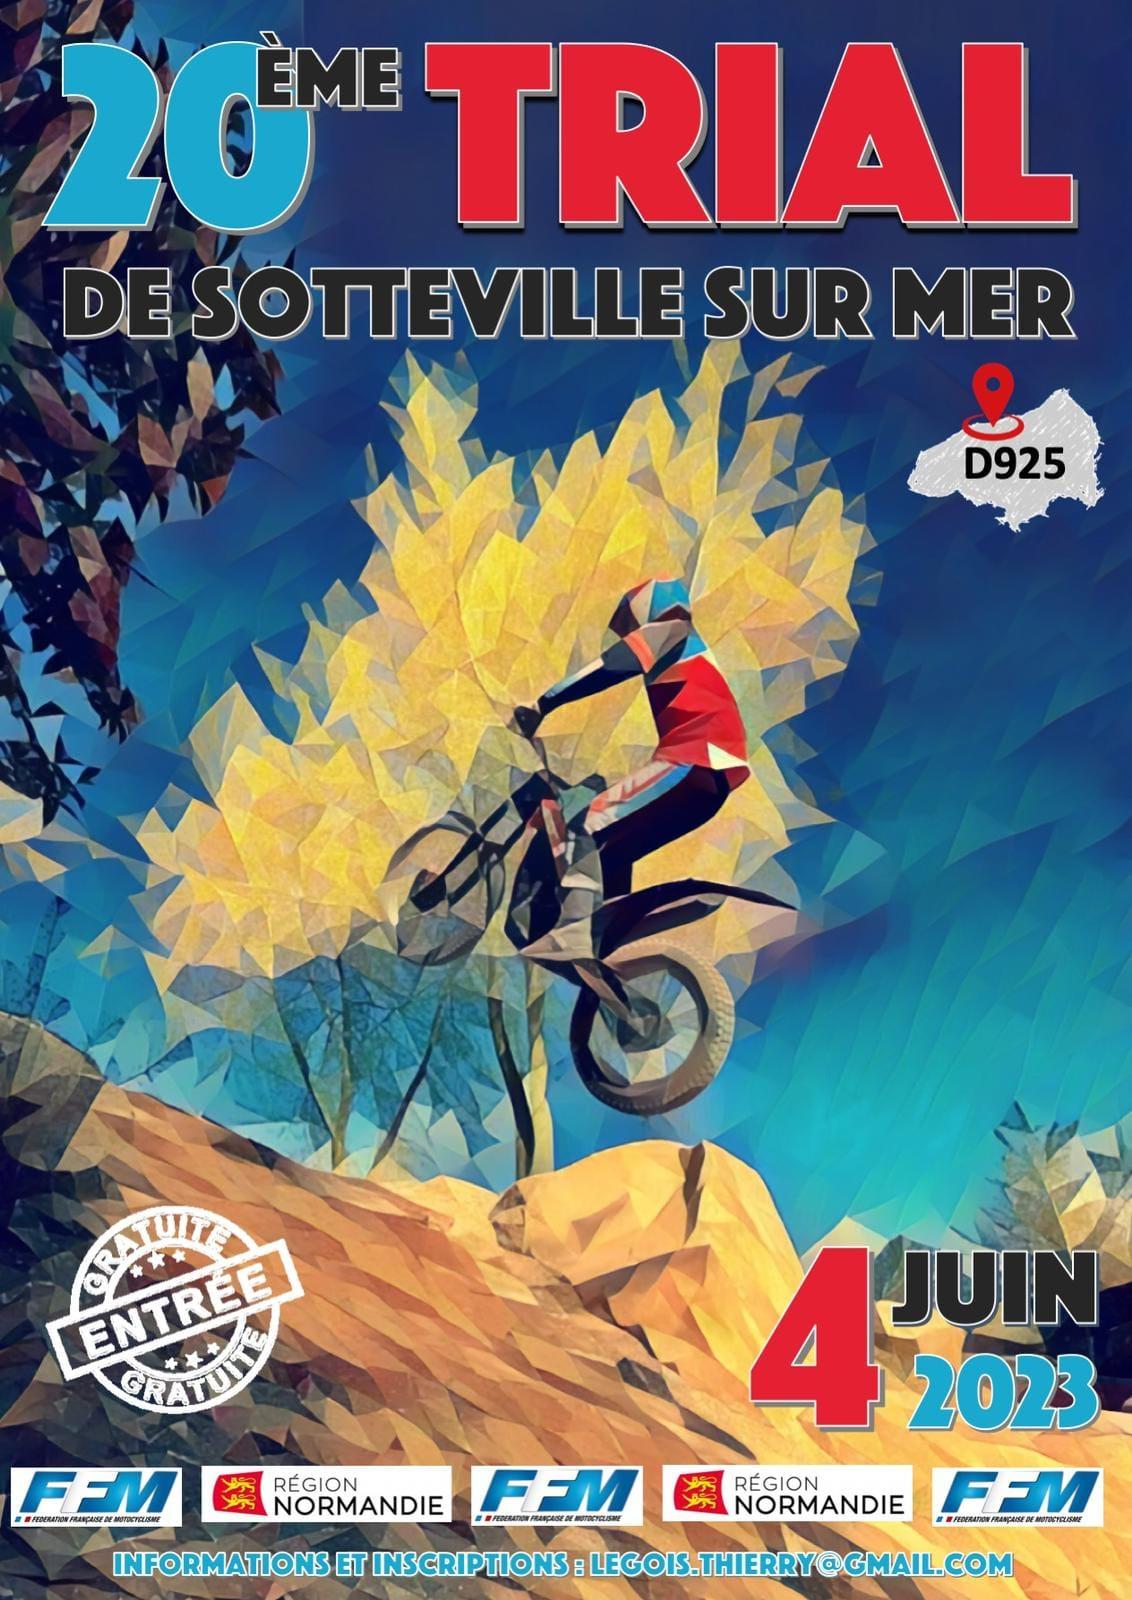 Sooteville affiche 2023